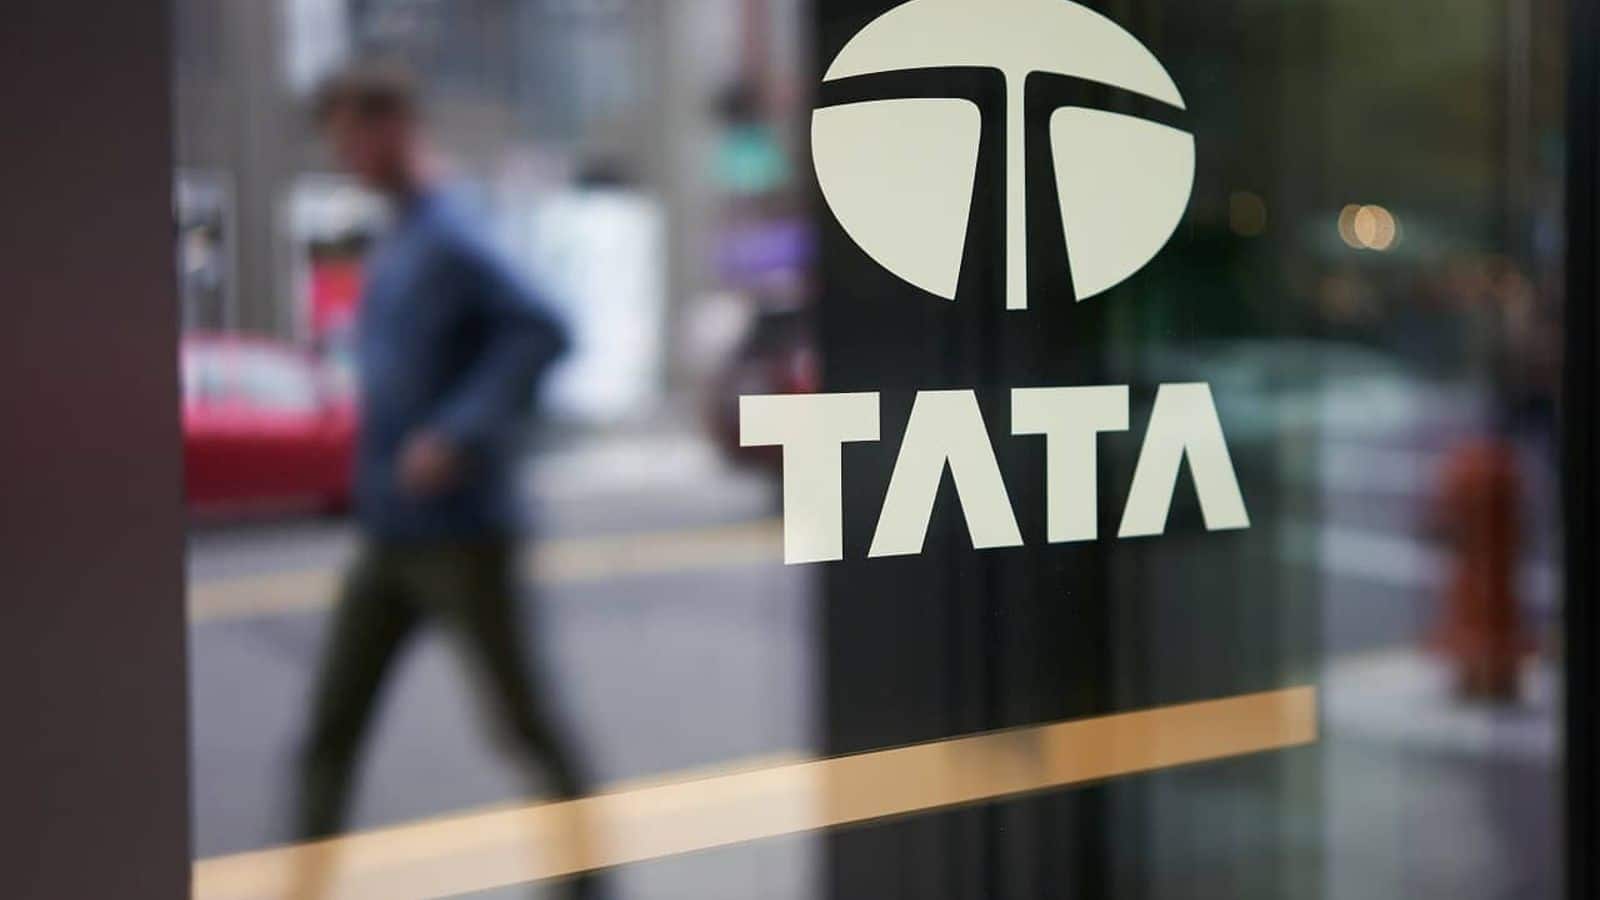 ₹200cr for Tata name: Group firms face increased royalty fee